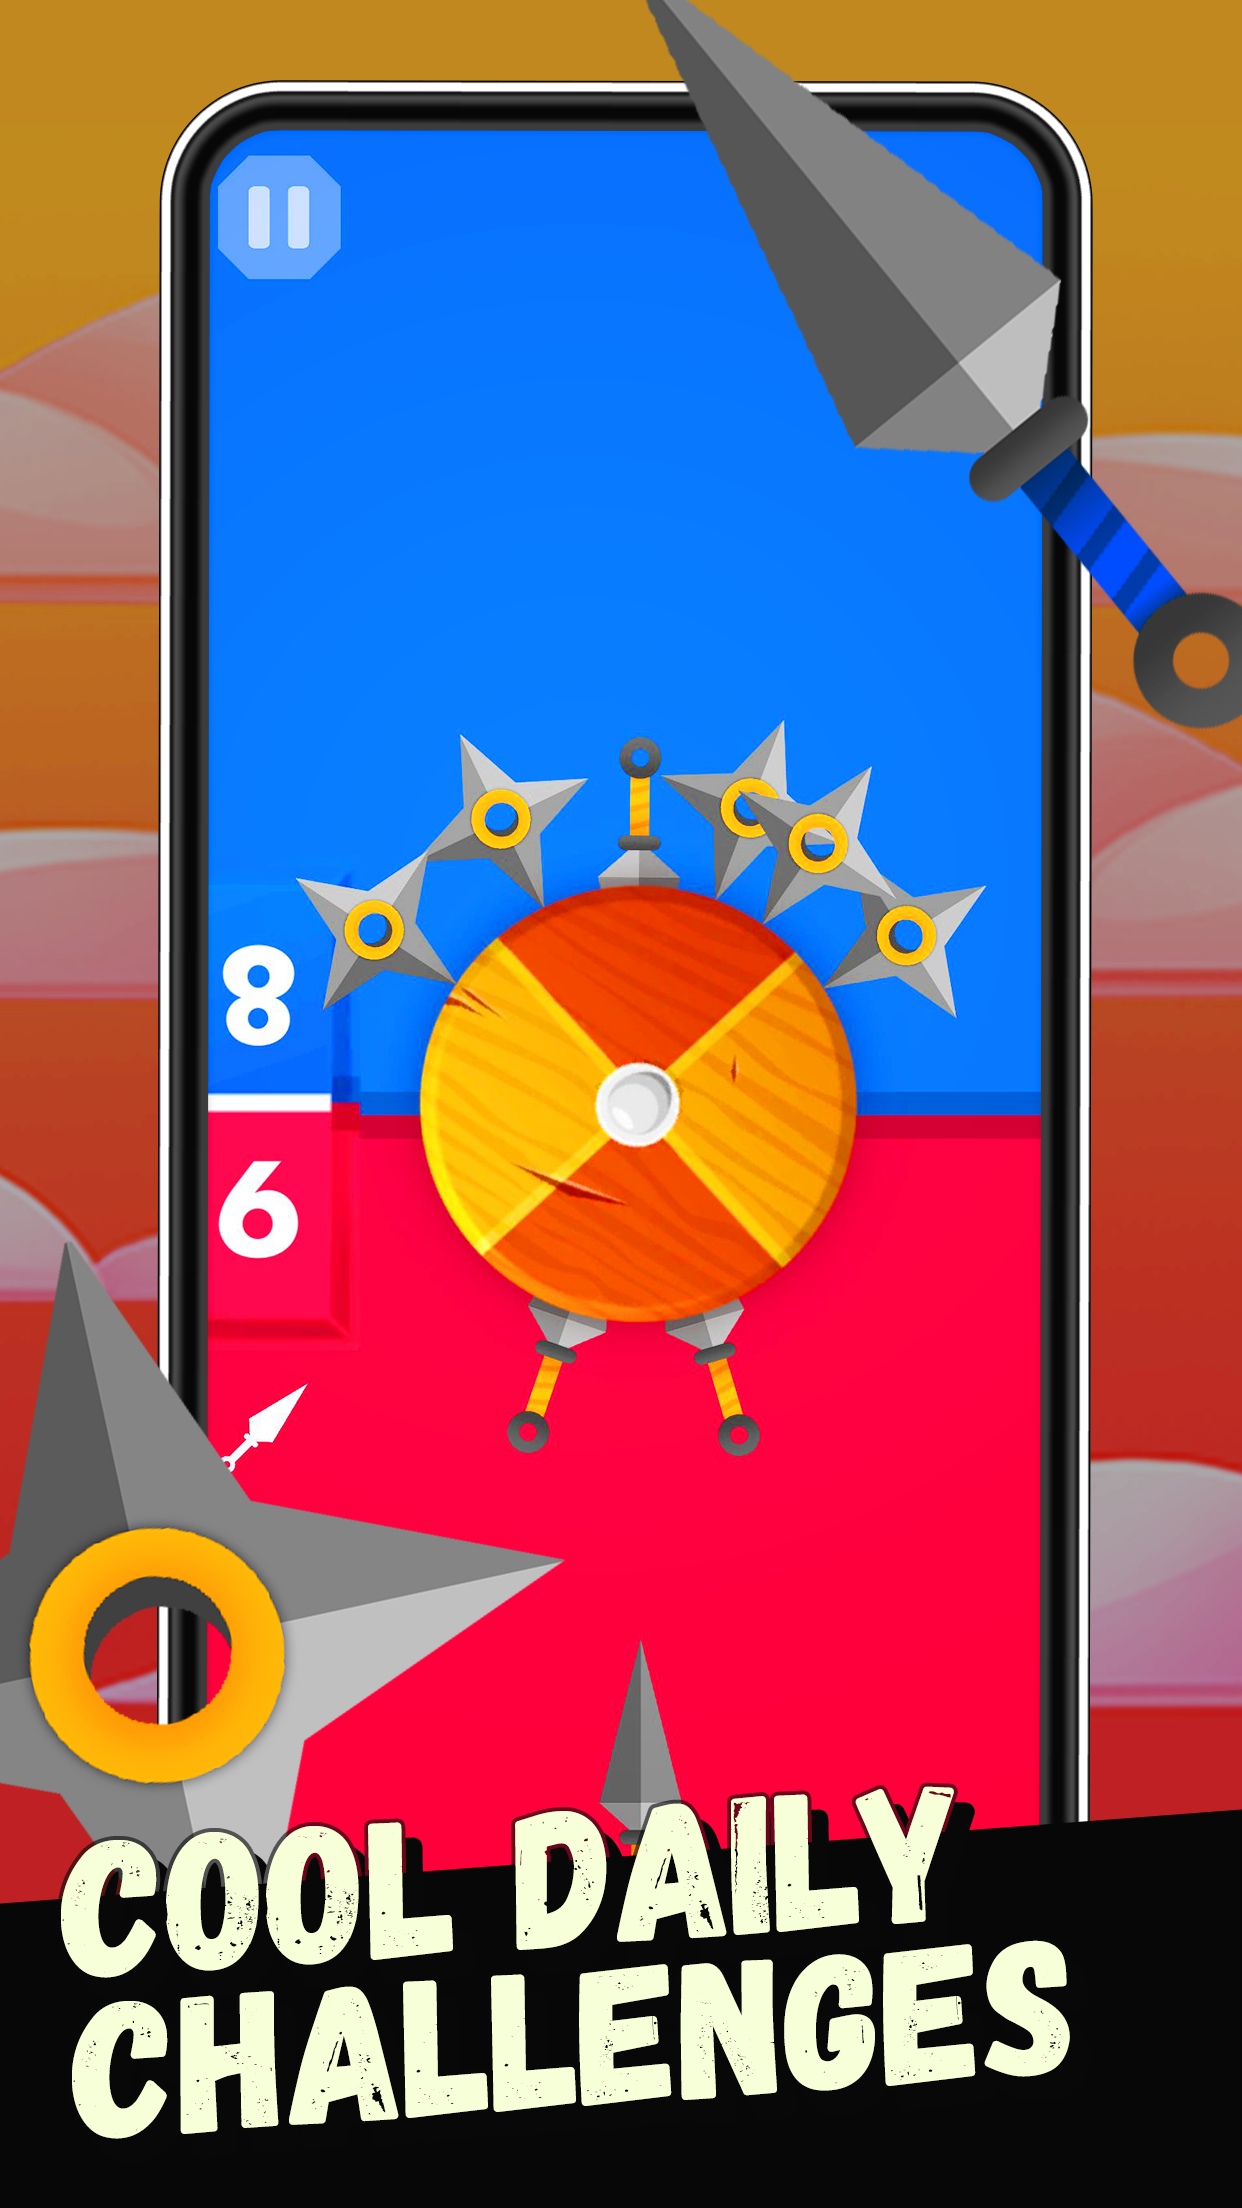 Family-friendly Mobile Games for Two - UNO!™ - 2 Player games : the  Challenge - Golf Battle - TapTap